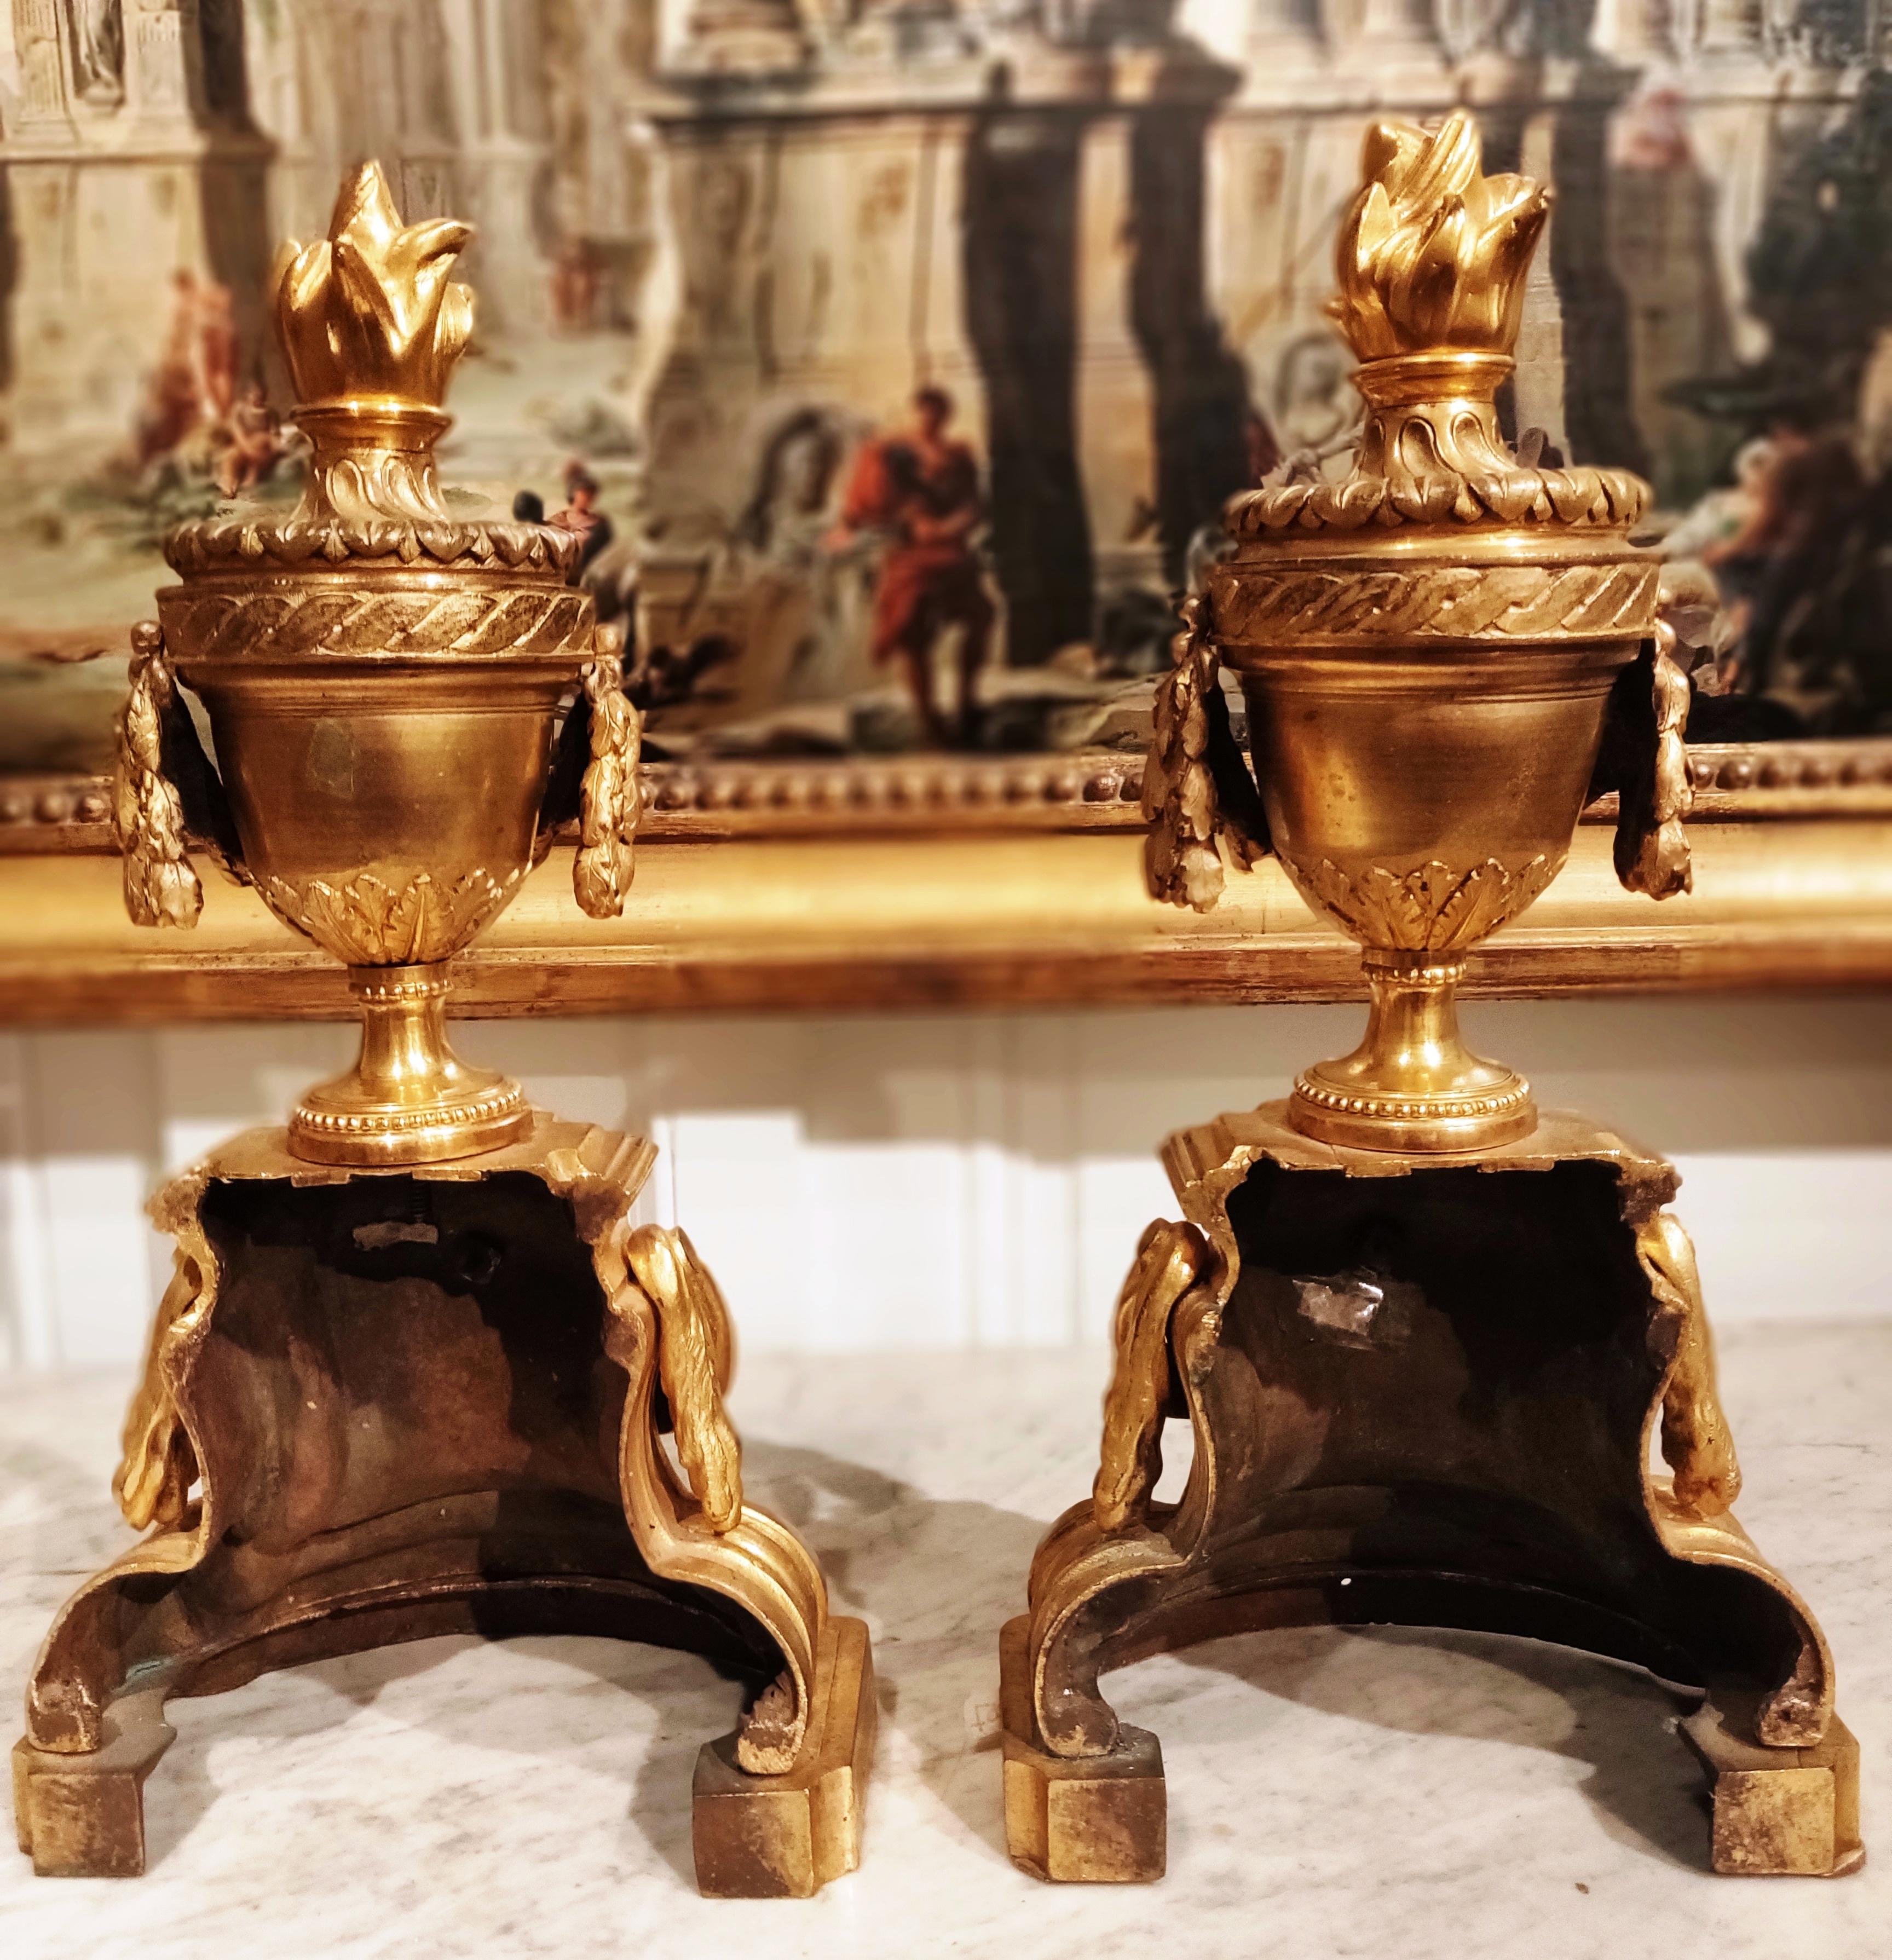 Exceptional Pair of Chased and Gilt Bronze Fire-dogs, France, Louis XVI Period (Louis XVI.) im Angebot